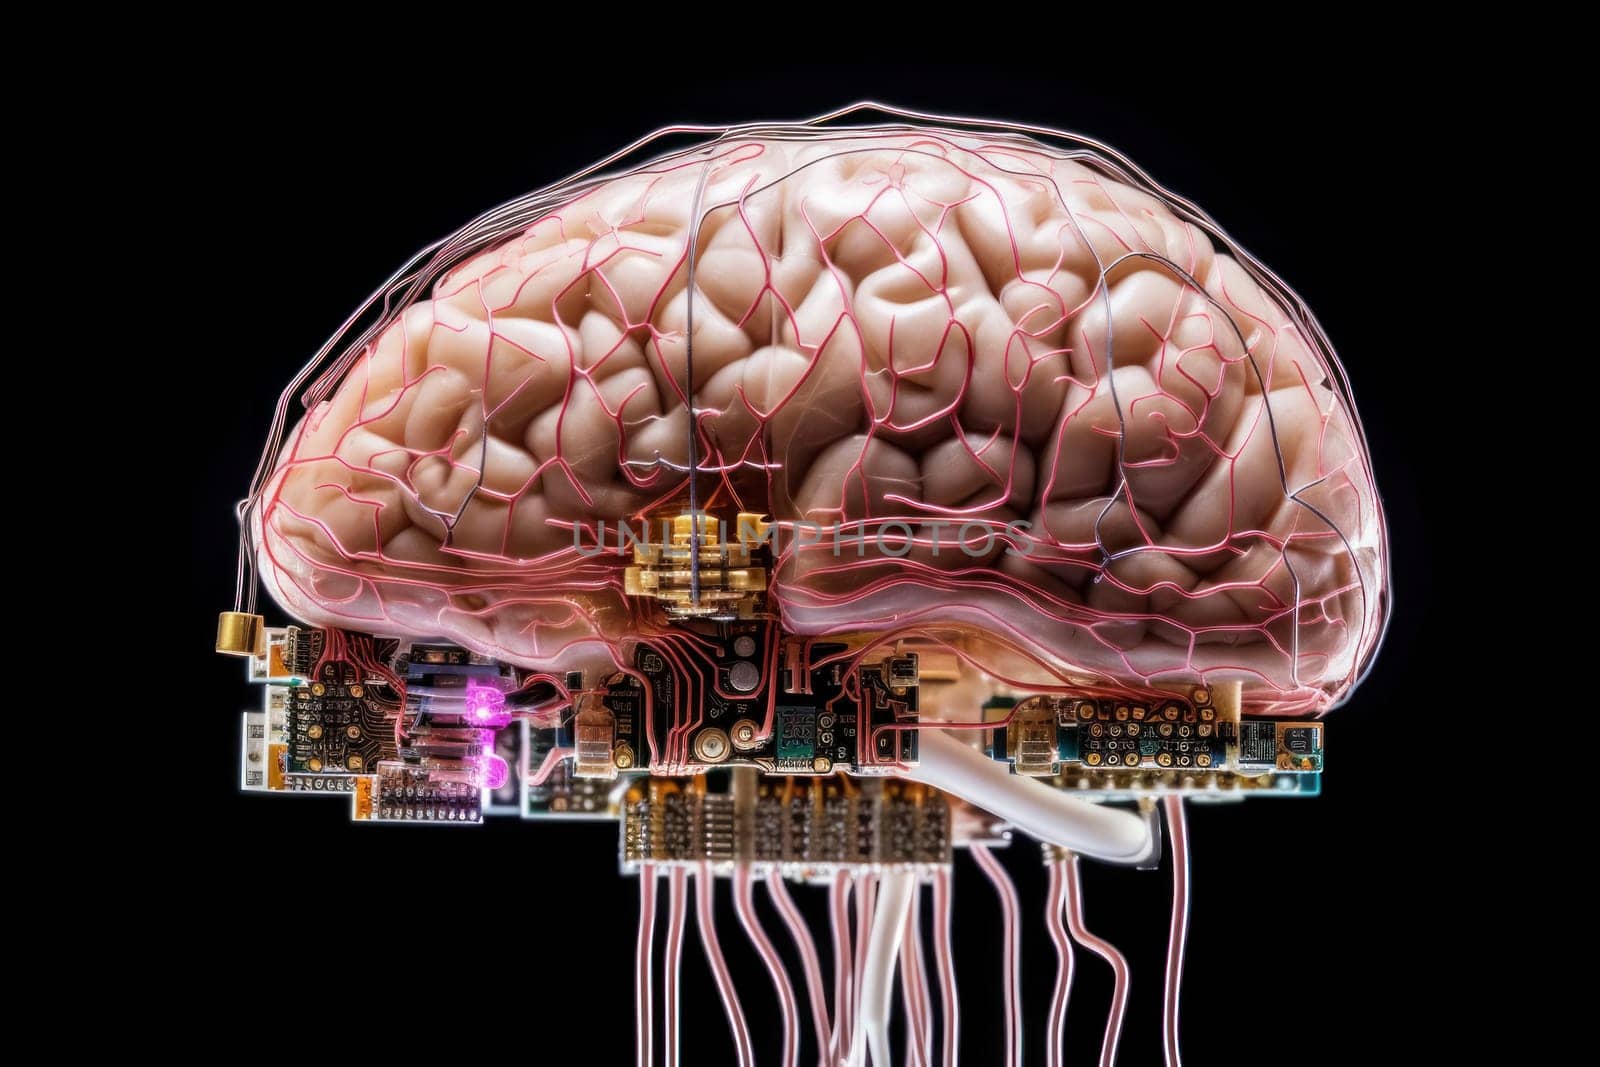 Human brain connected to intricate circuit boards and microchips.